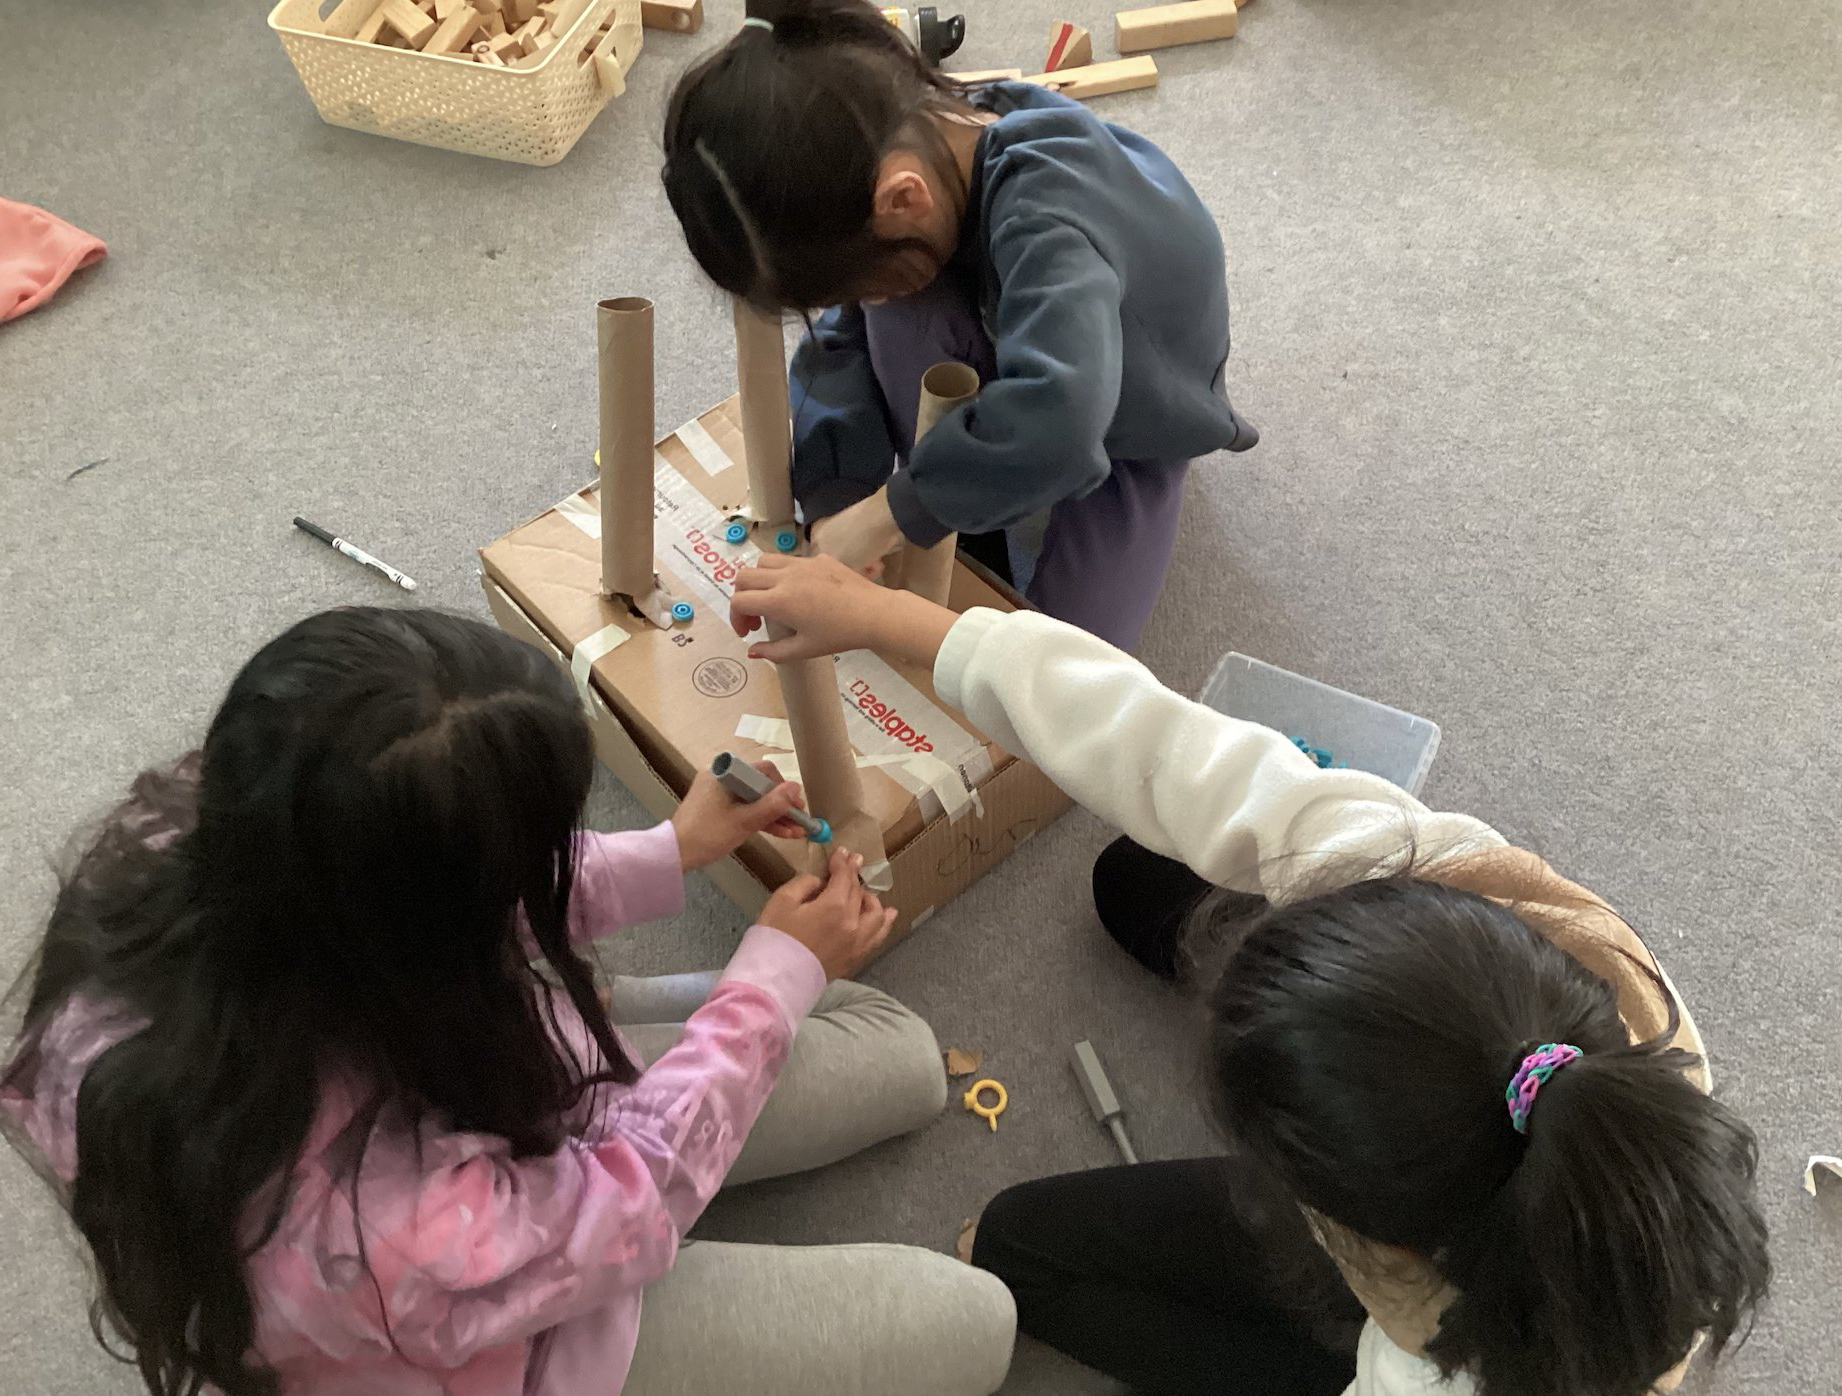 Kids assembling chairs with cardboard and paper materials